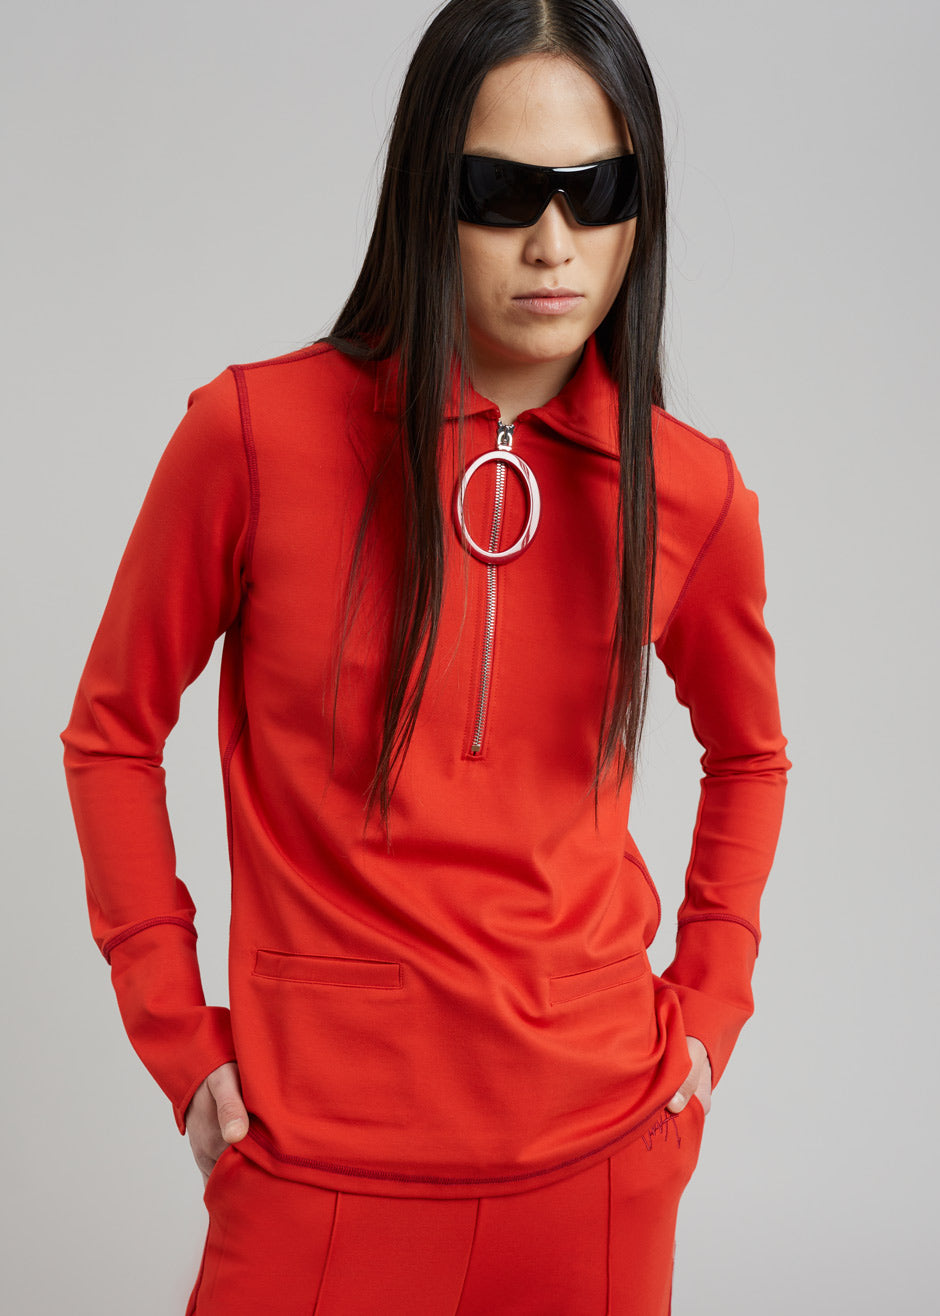 JW Anderson Ring Puller Half Zip Track Top - Red - 7